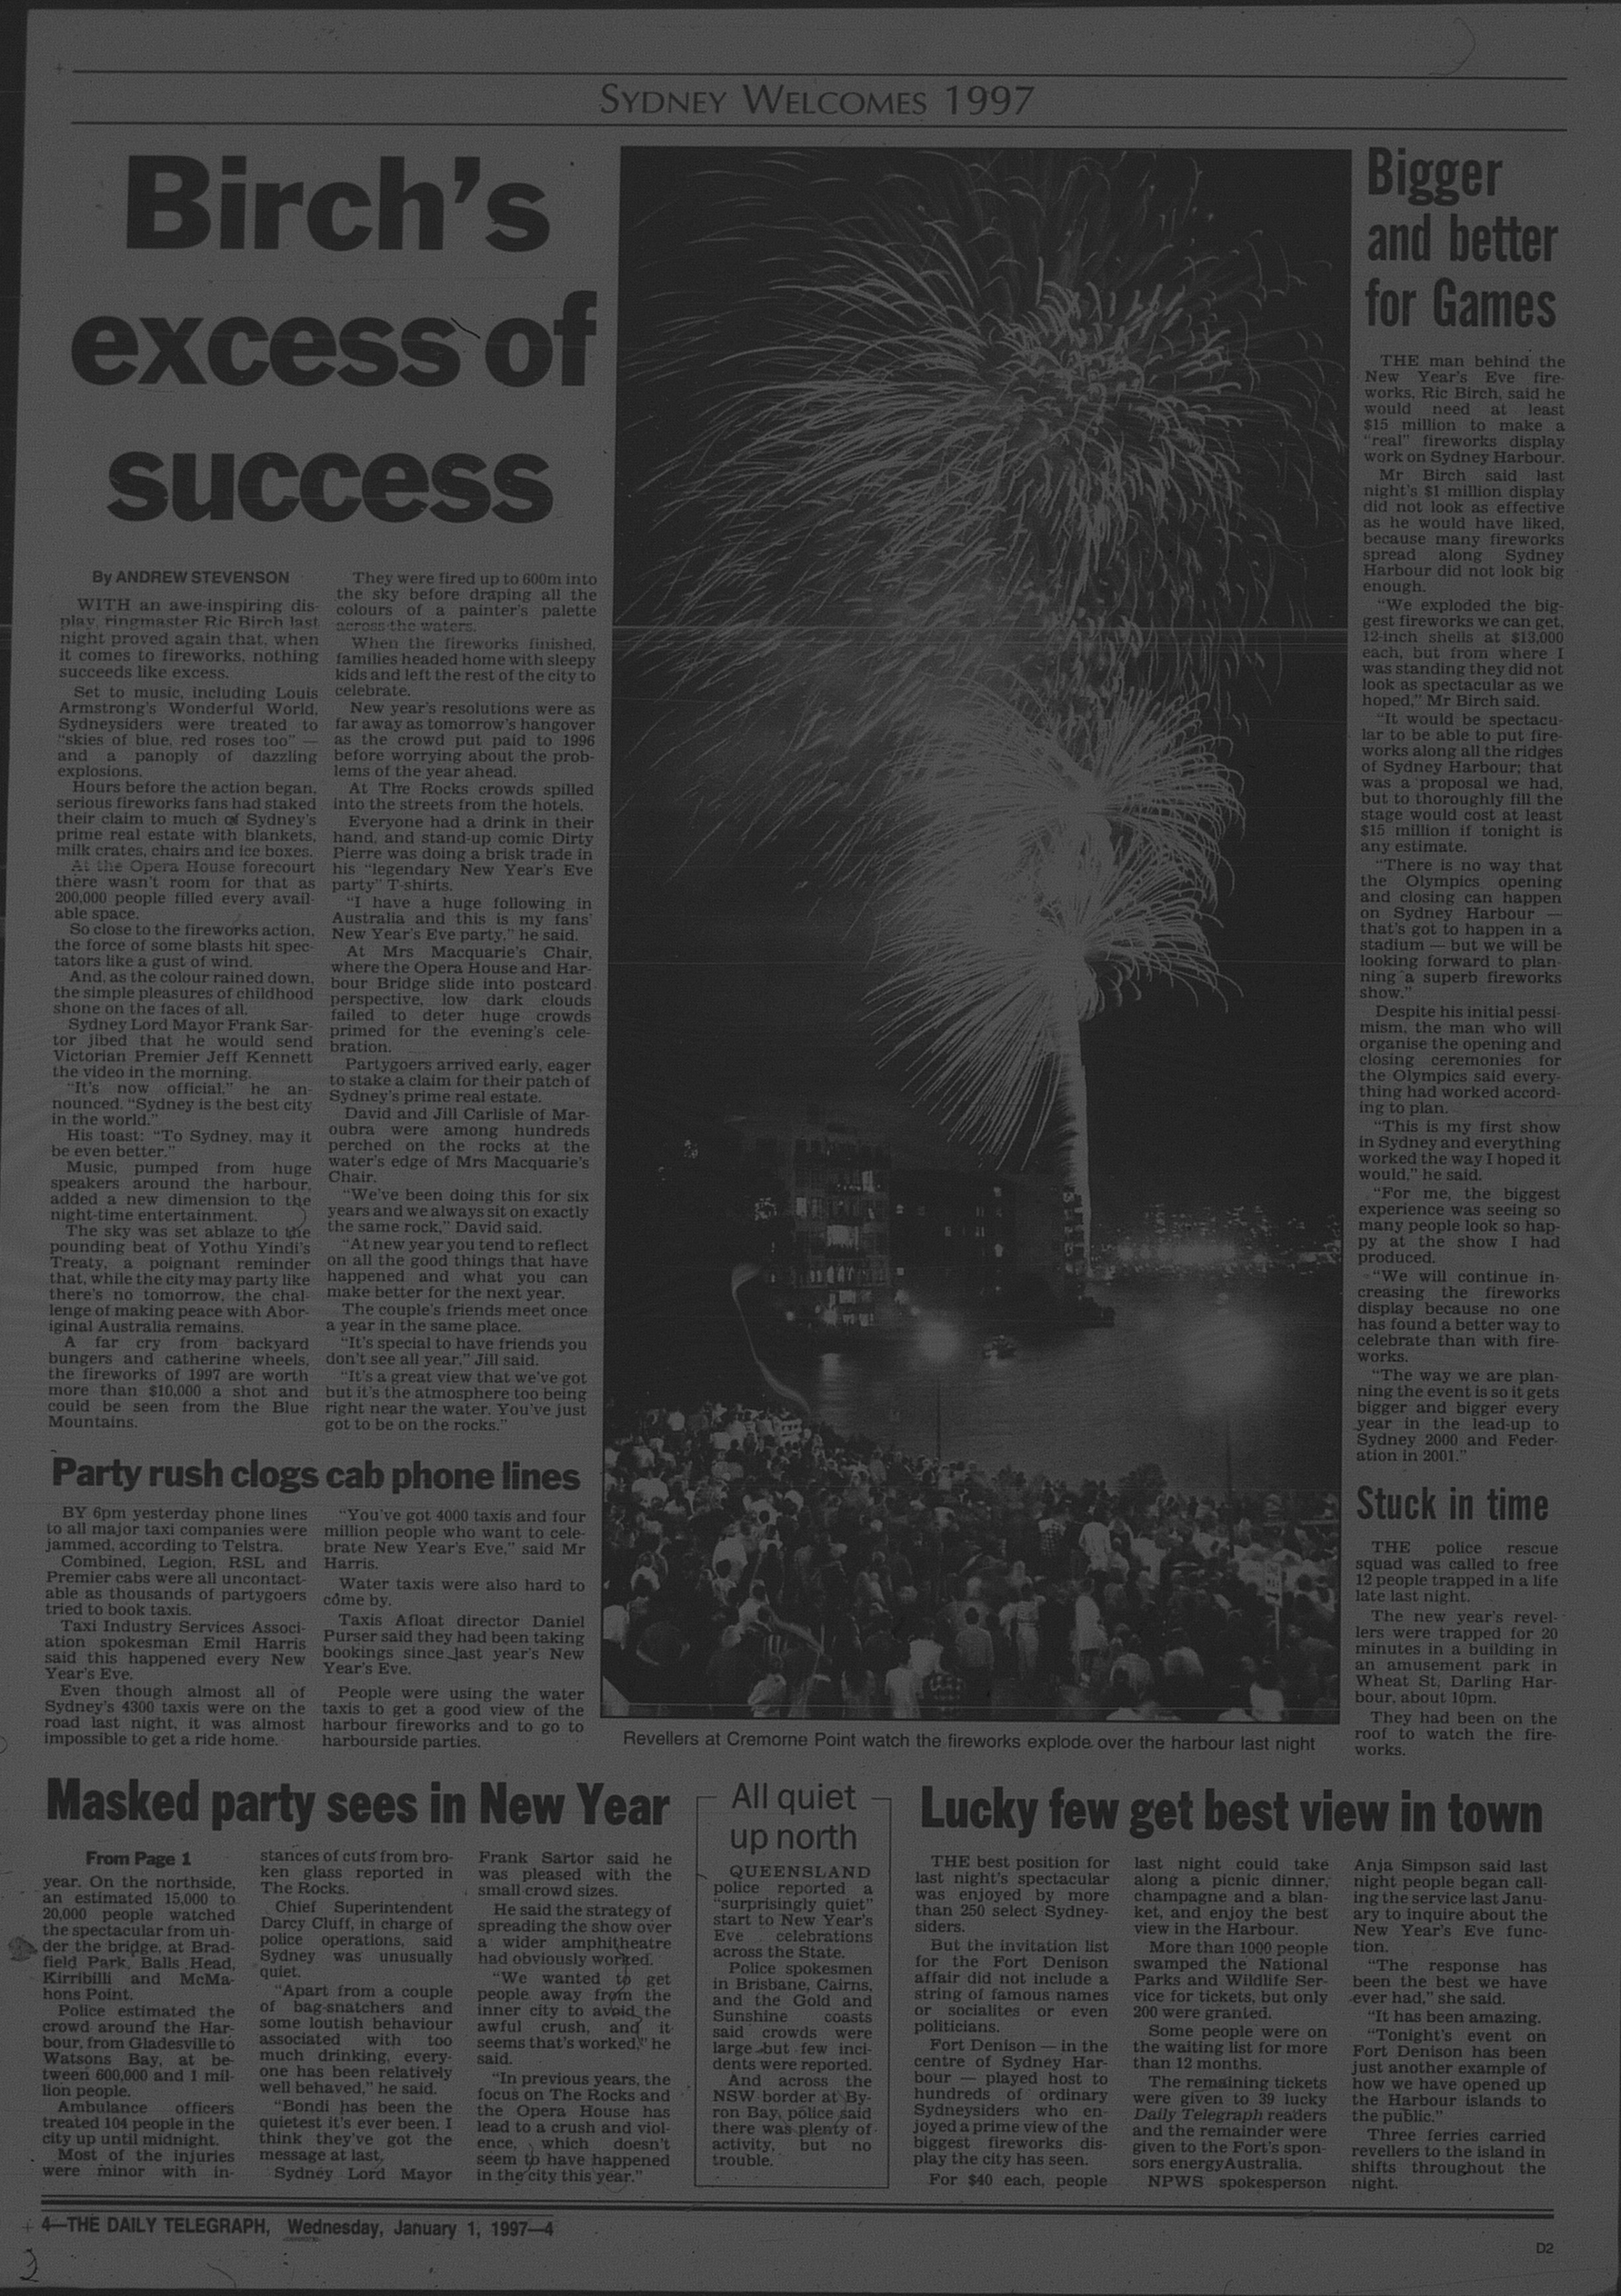 Sydney welcomes 1997 january 1 1997 daily telegraph 1-4 (2)